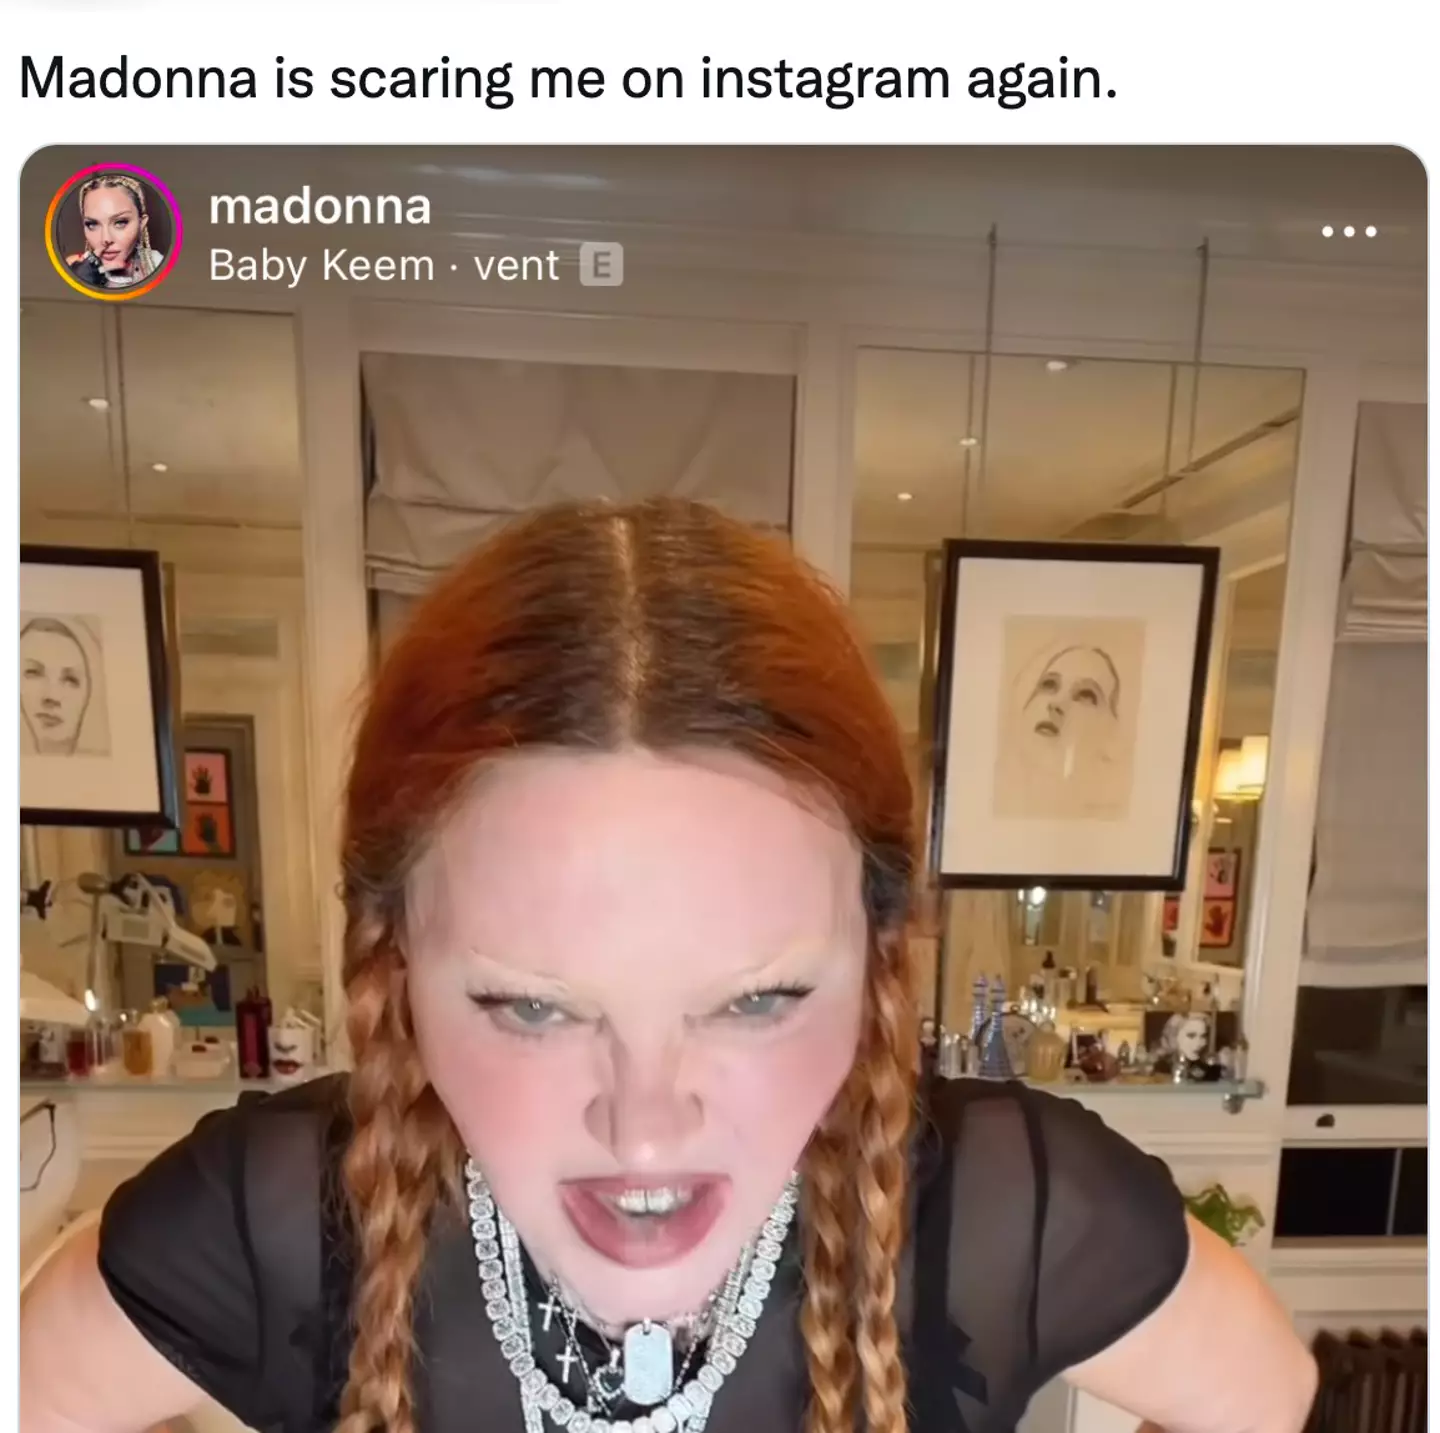 Fans have been left confused after Madonna's latest post.